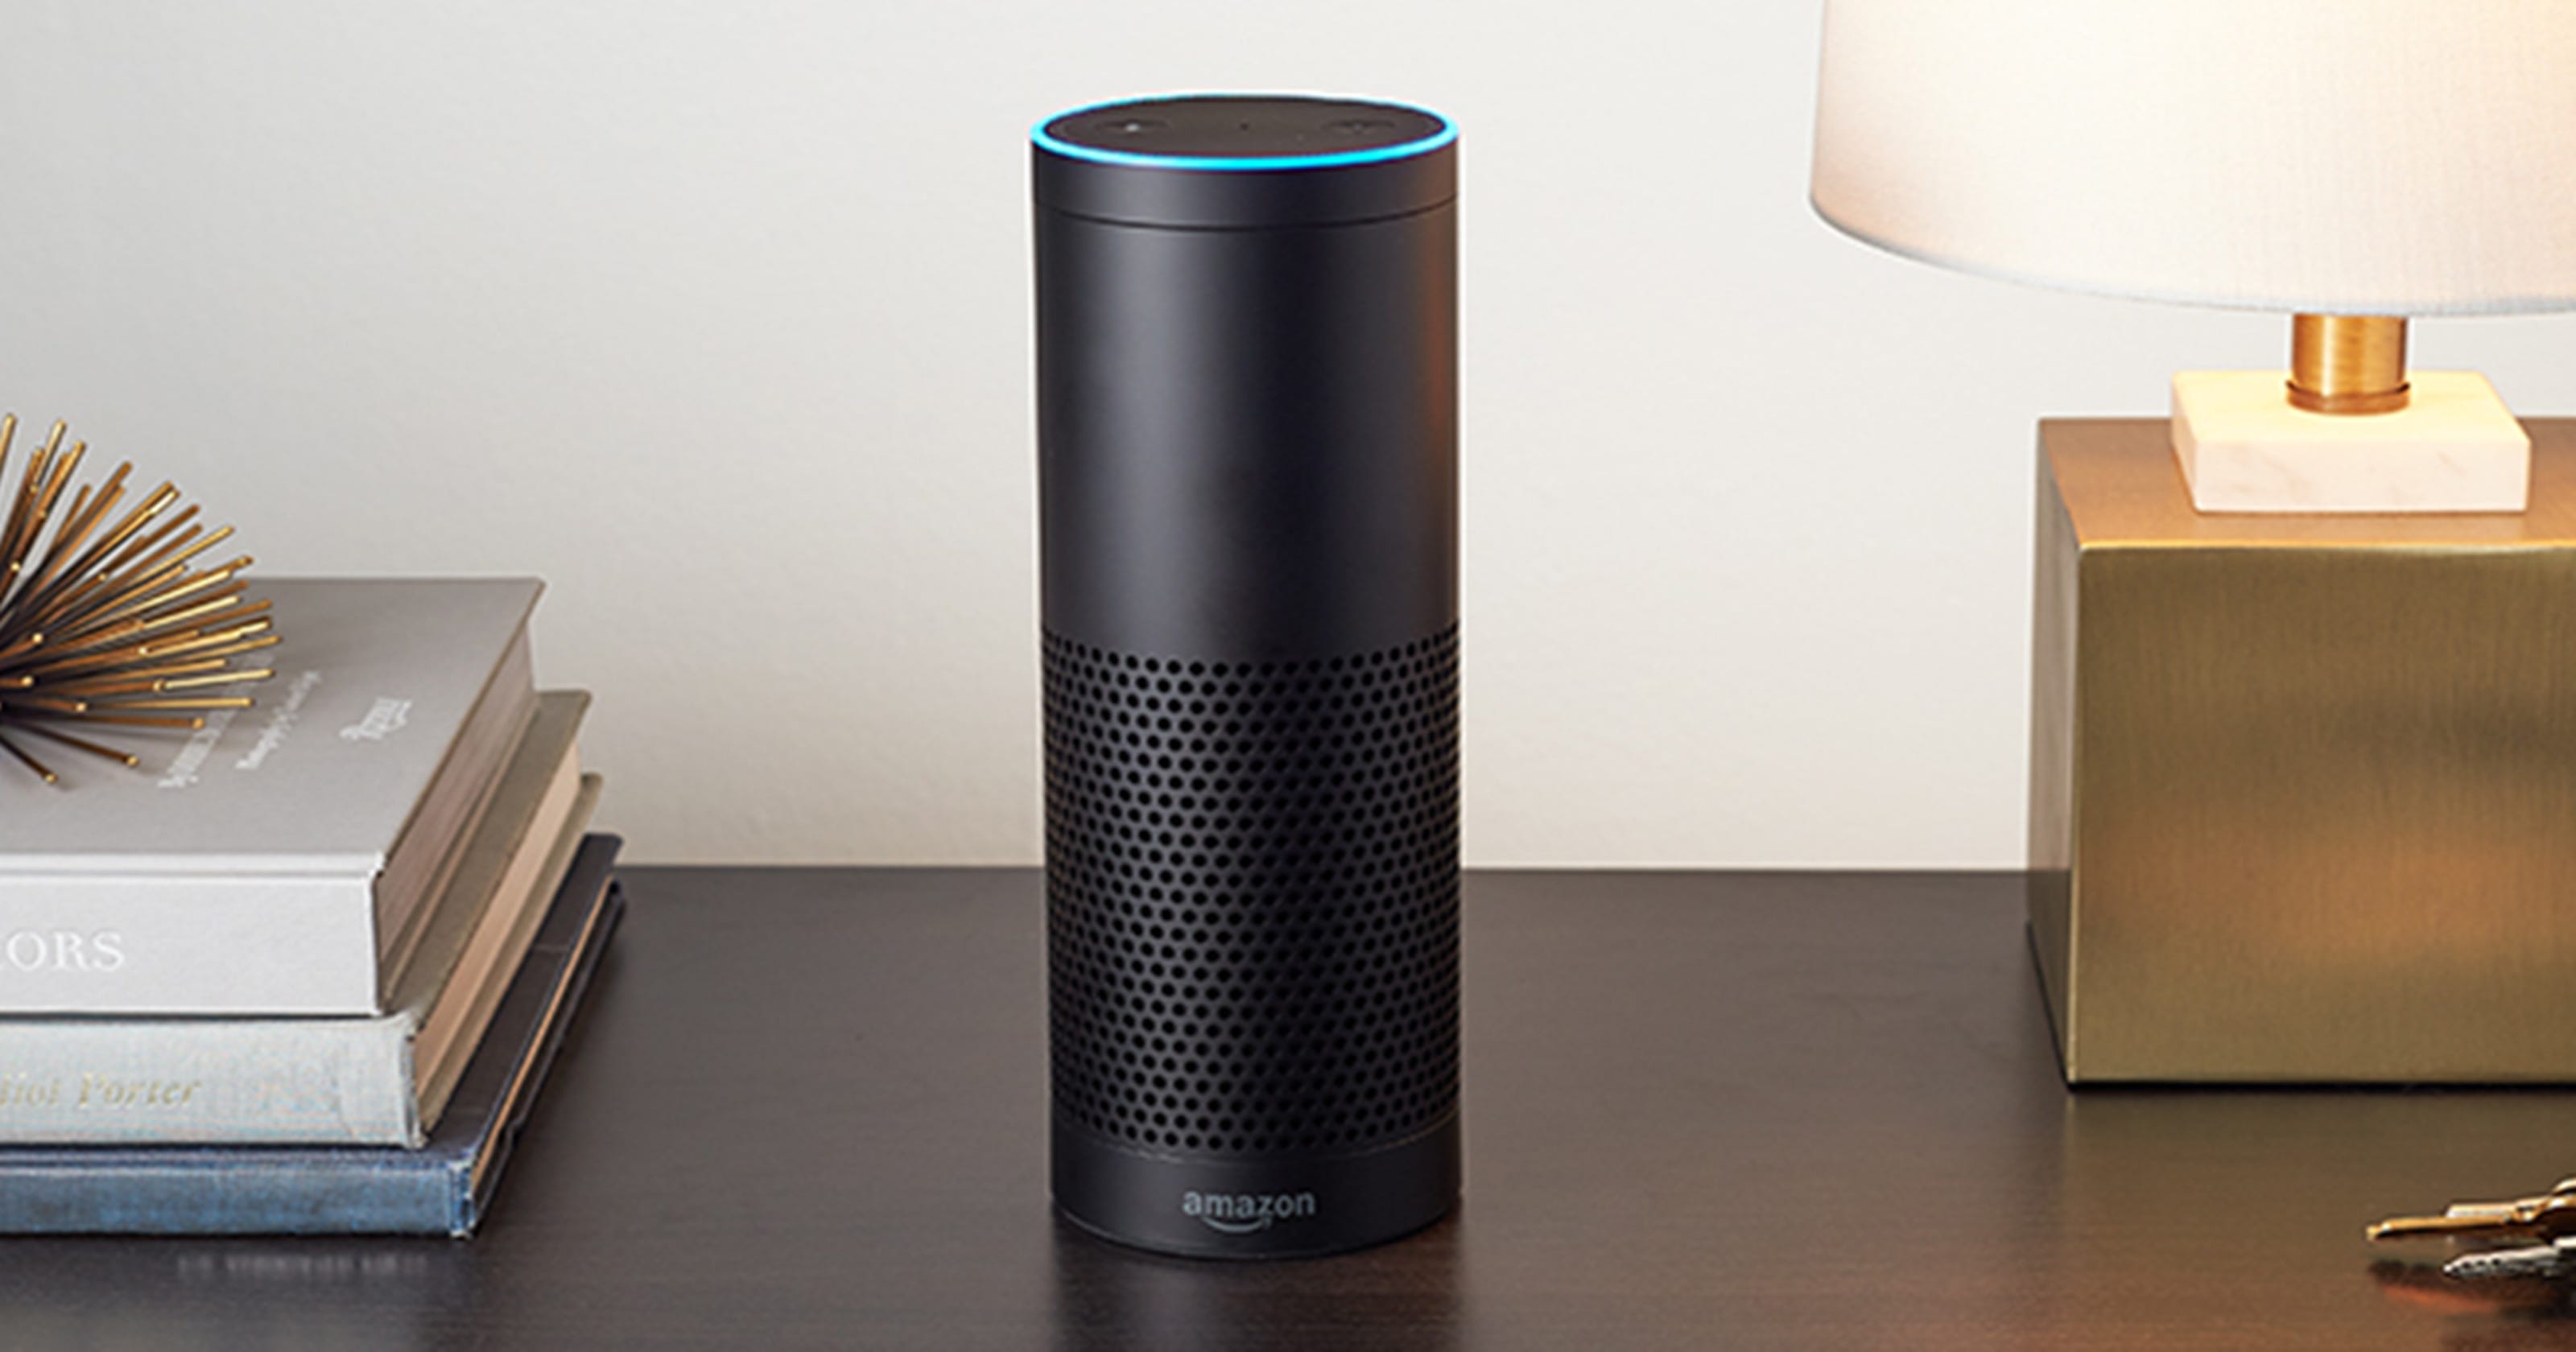 Amazon to launch new touchscreen video Echo, report says3200 x 1680